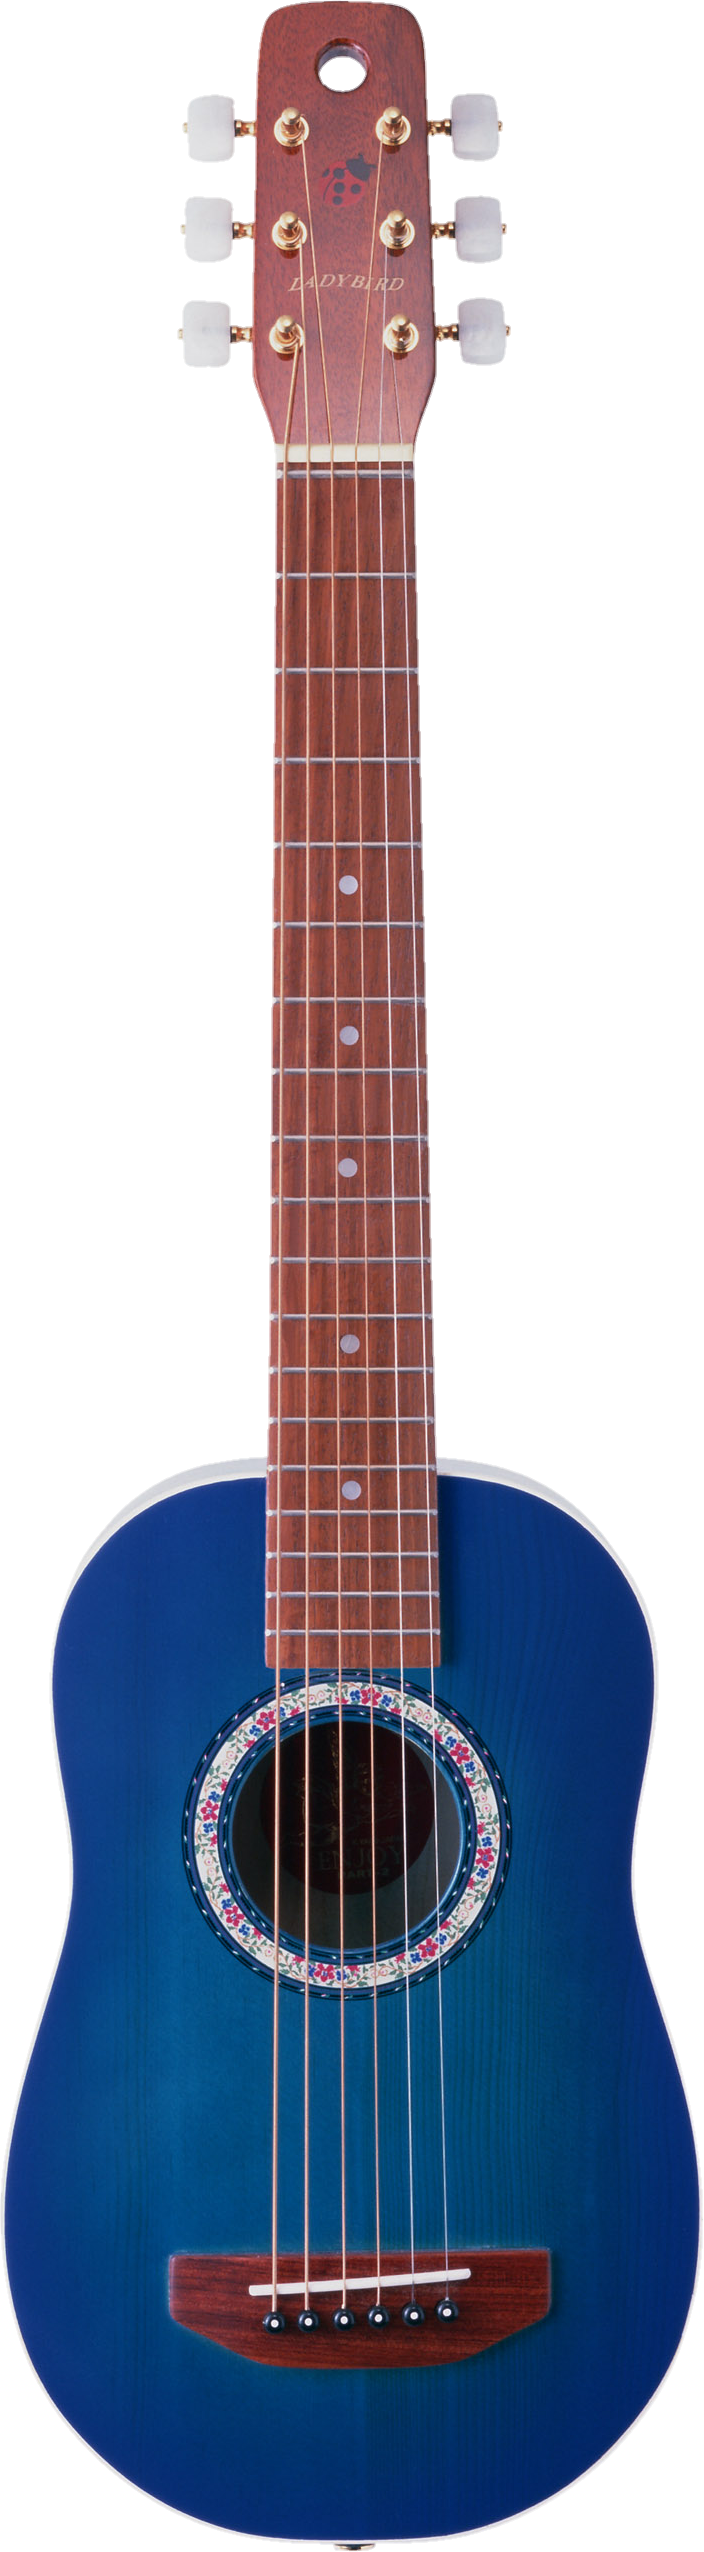 guitar-png-image-from-pngfre-34